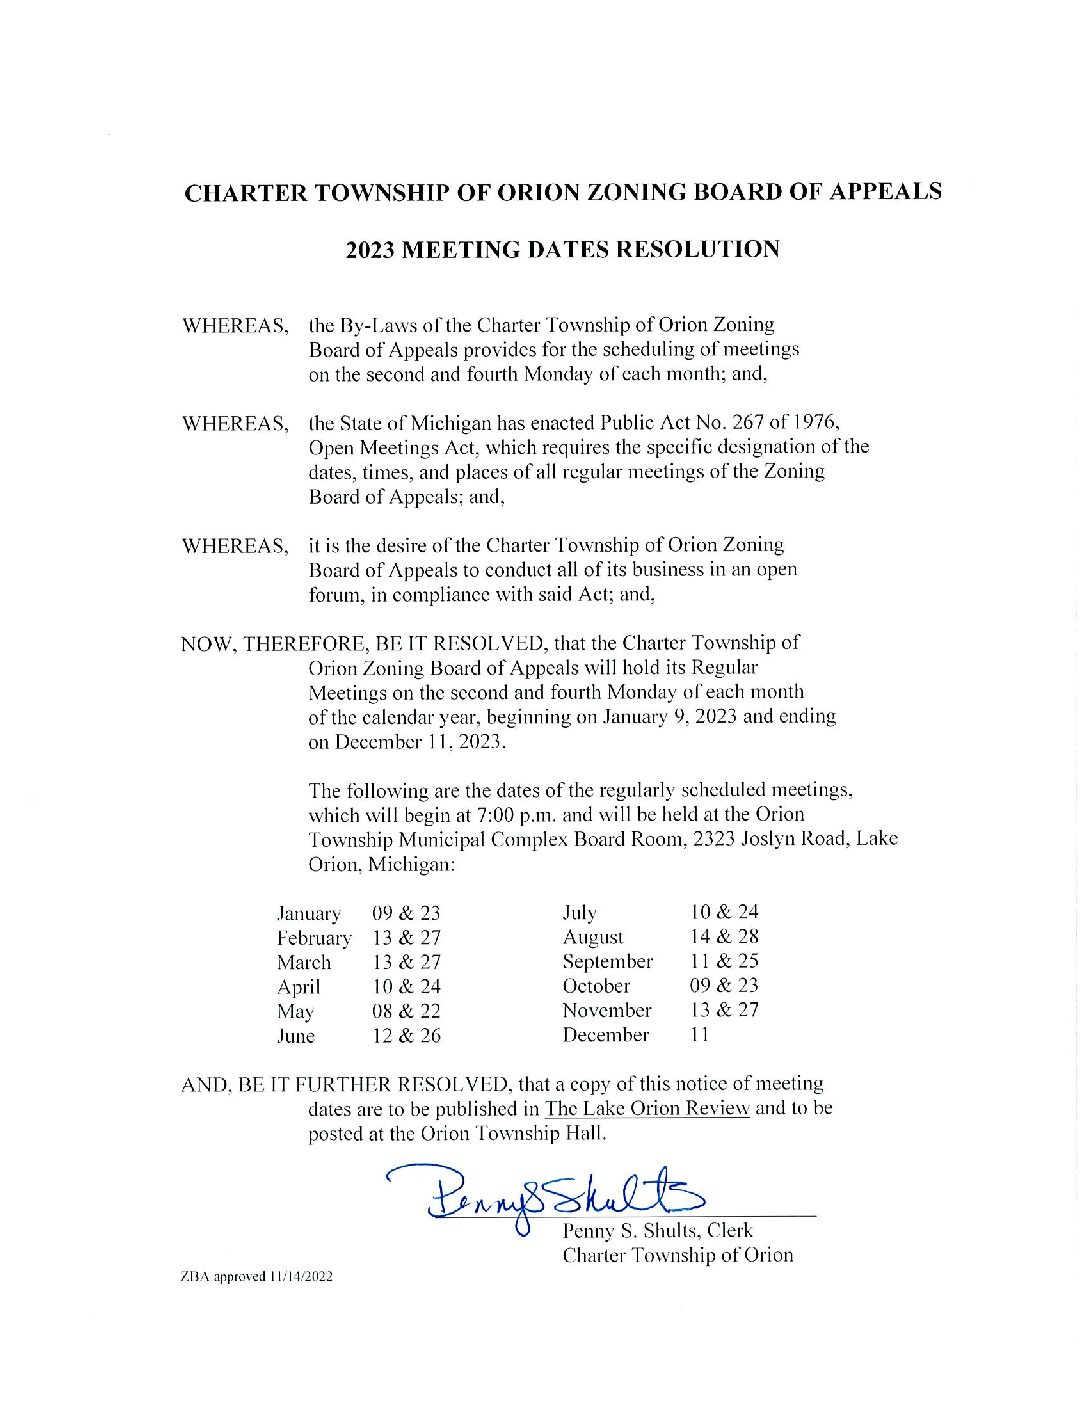 Zoning Board of Appeals 2023 Meeting Dates